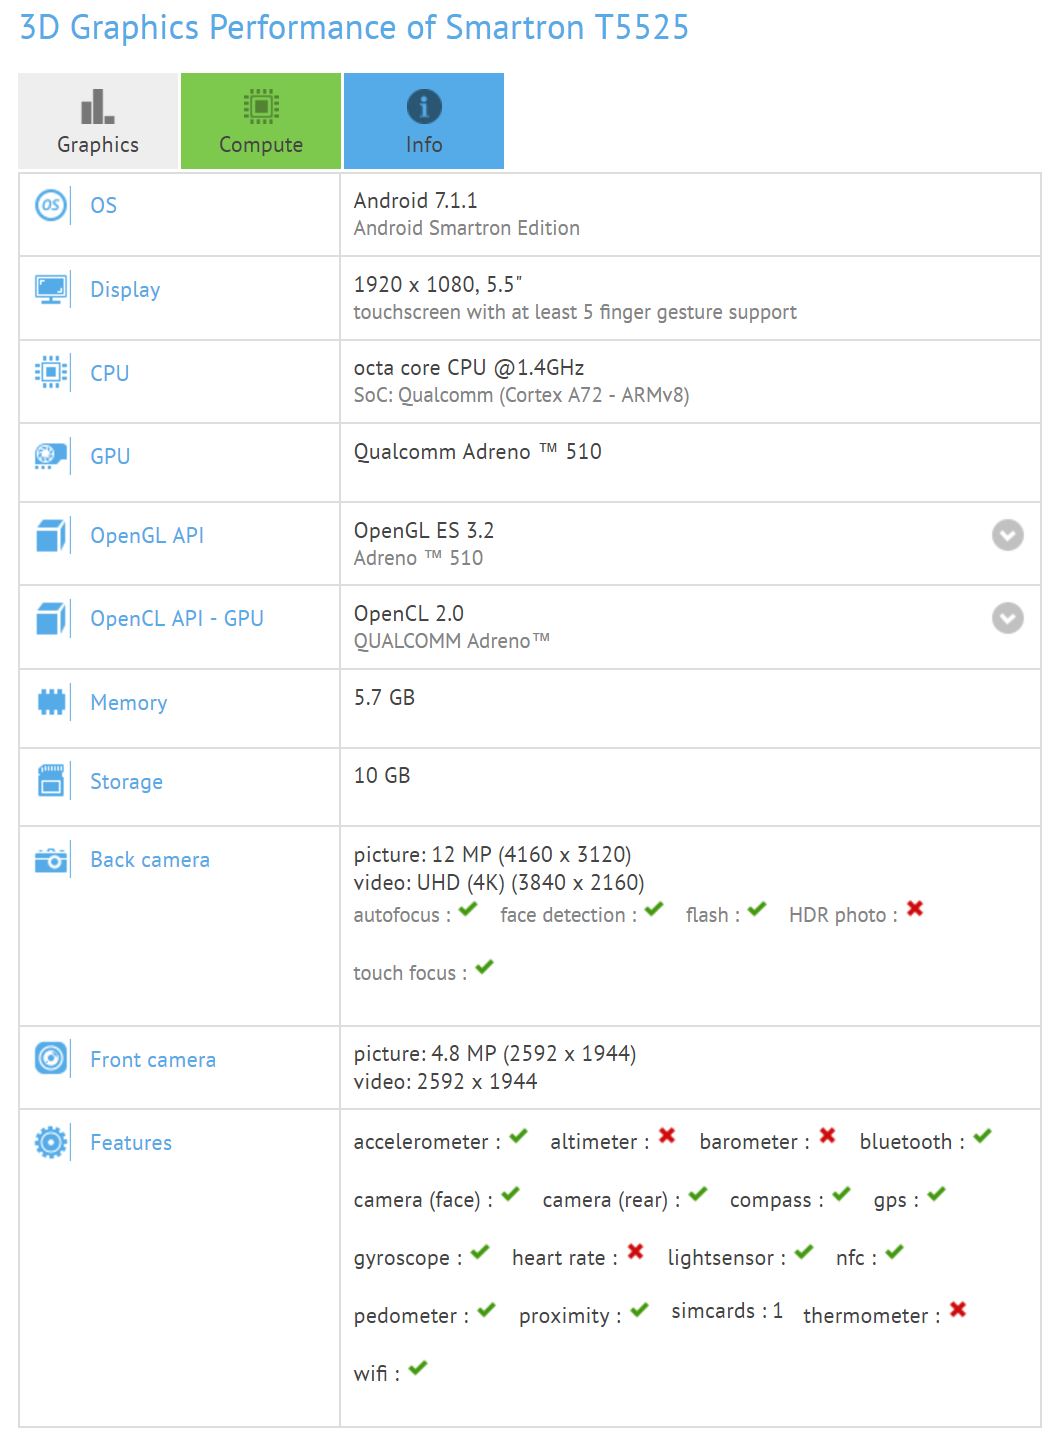 Smartron device spotted with 6GB RAM on GFXBench 2